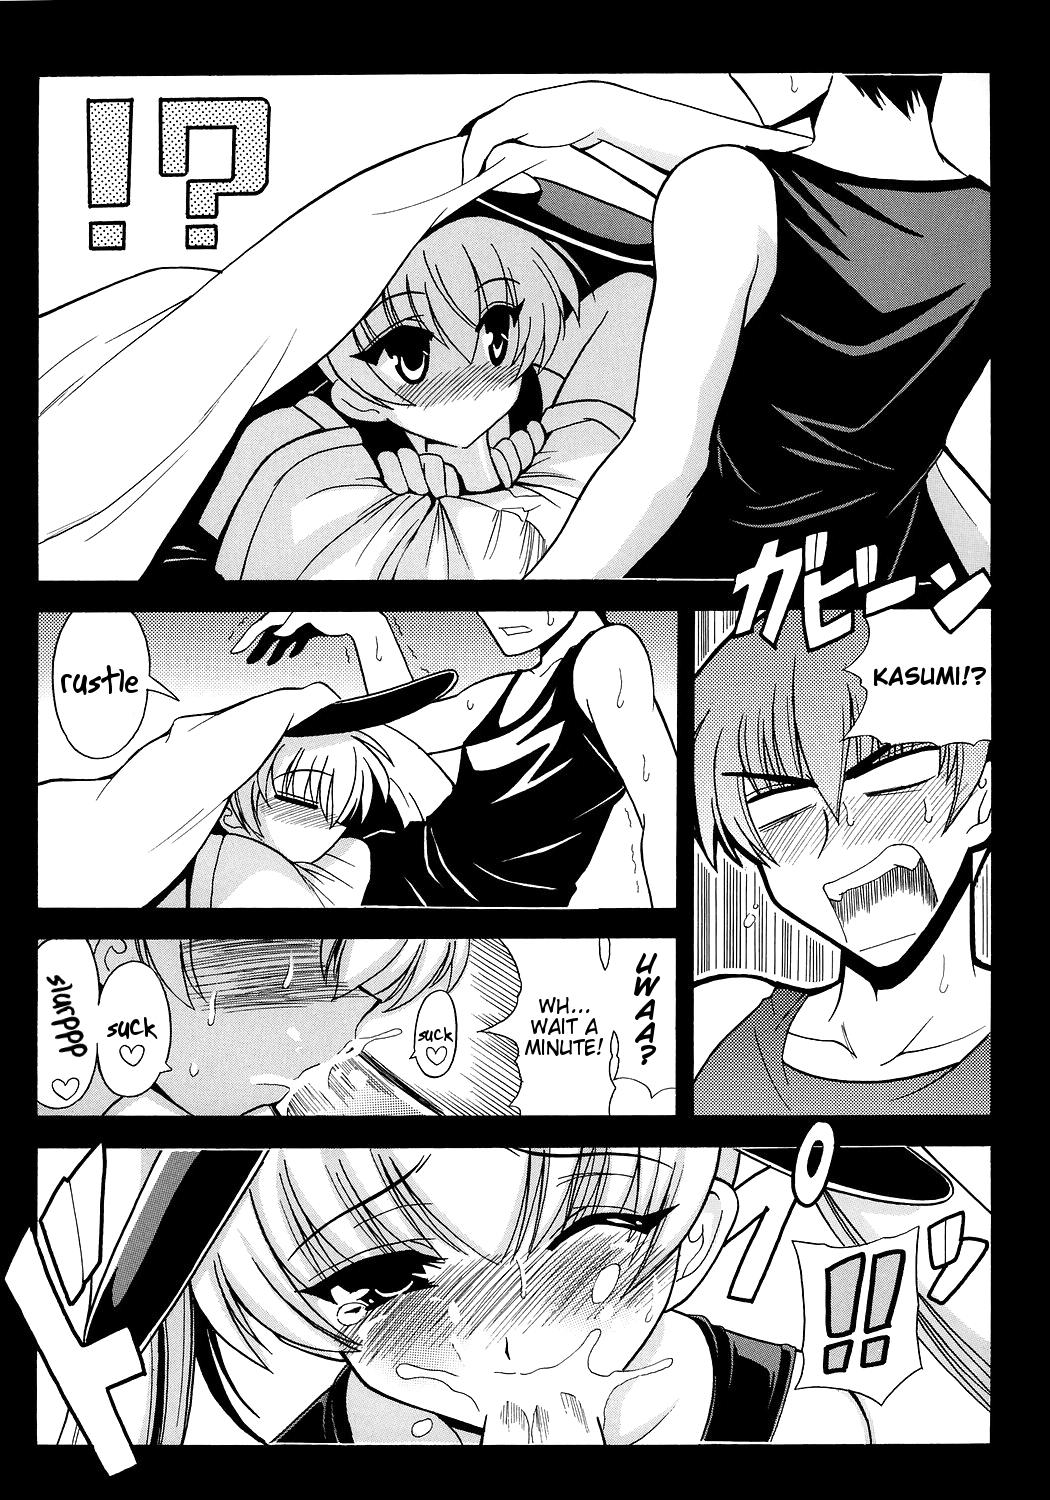 Hotwife Kasumi Maniax - Muv luv Gaygroup - Page 7